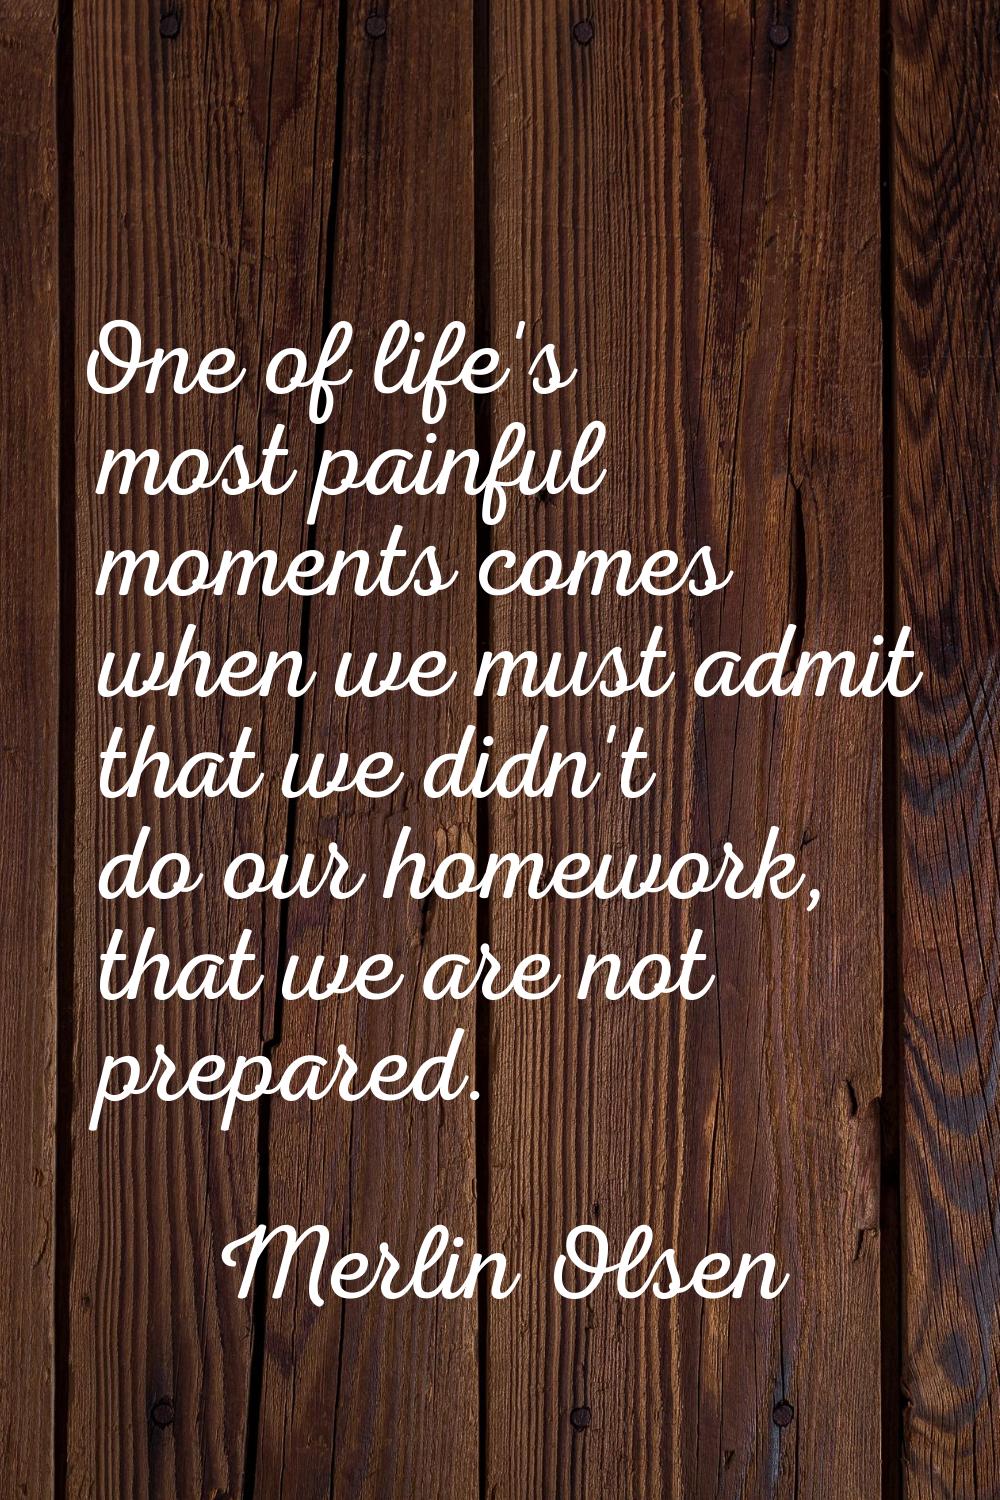 One of life's most painful moments comes when we must admit that we didn't do our homework, that we